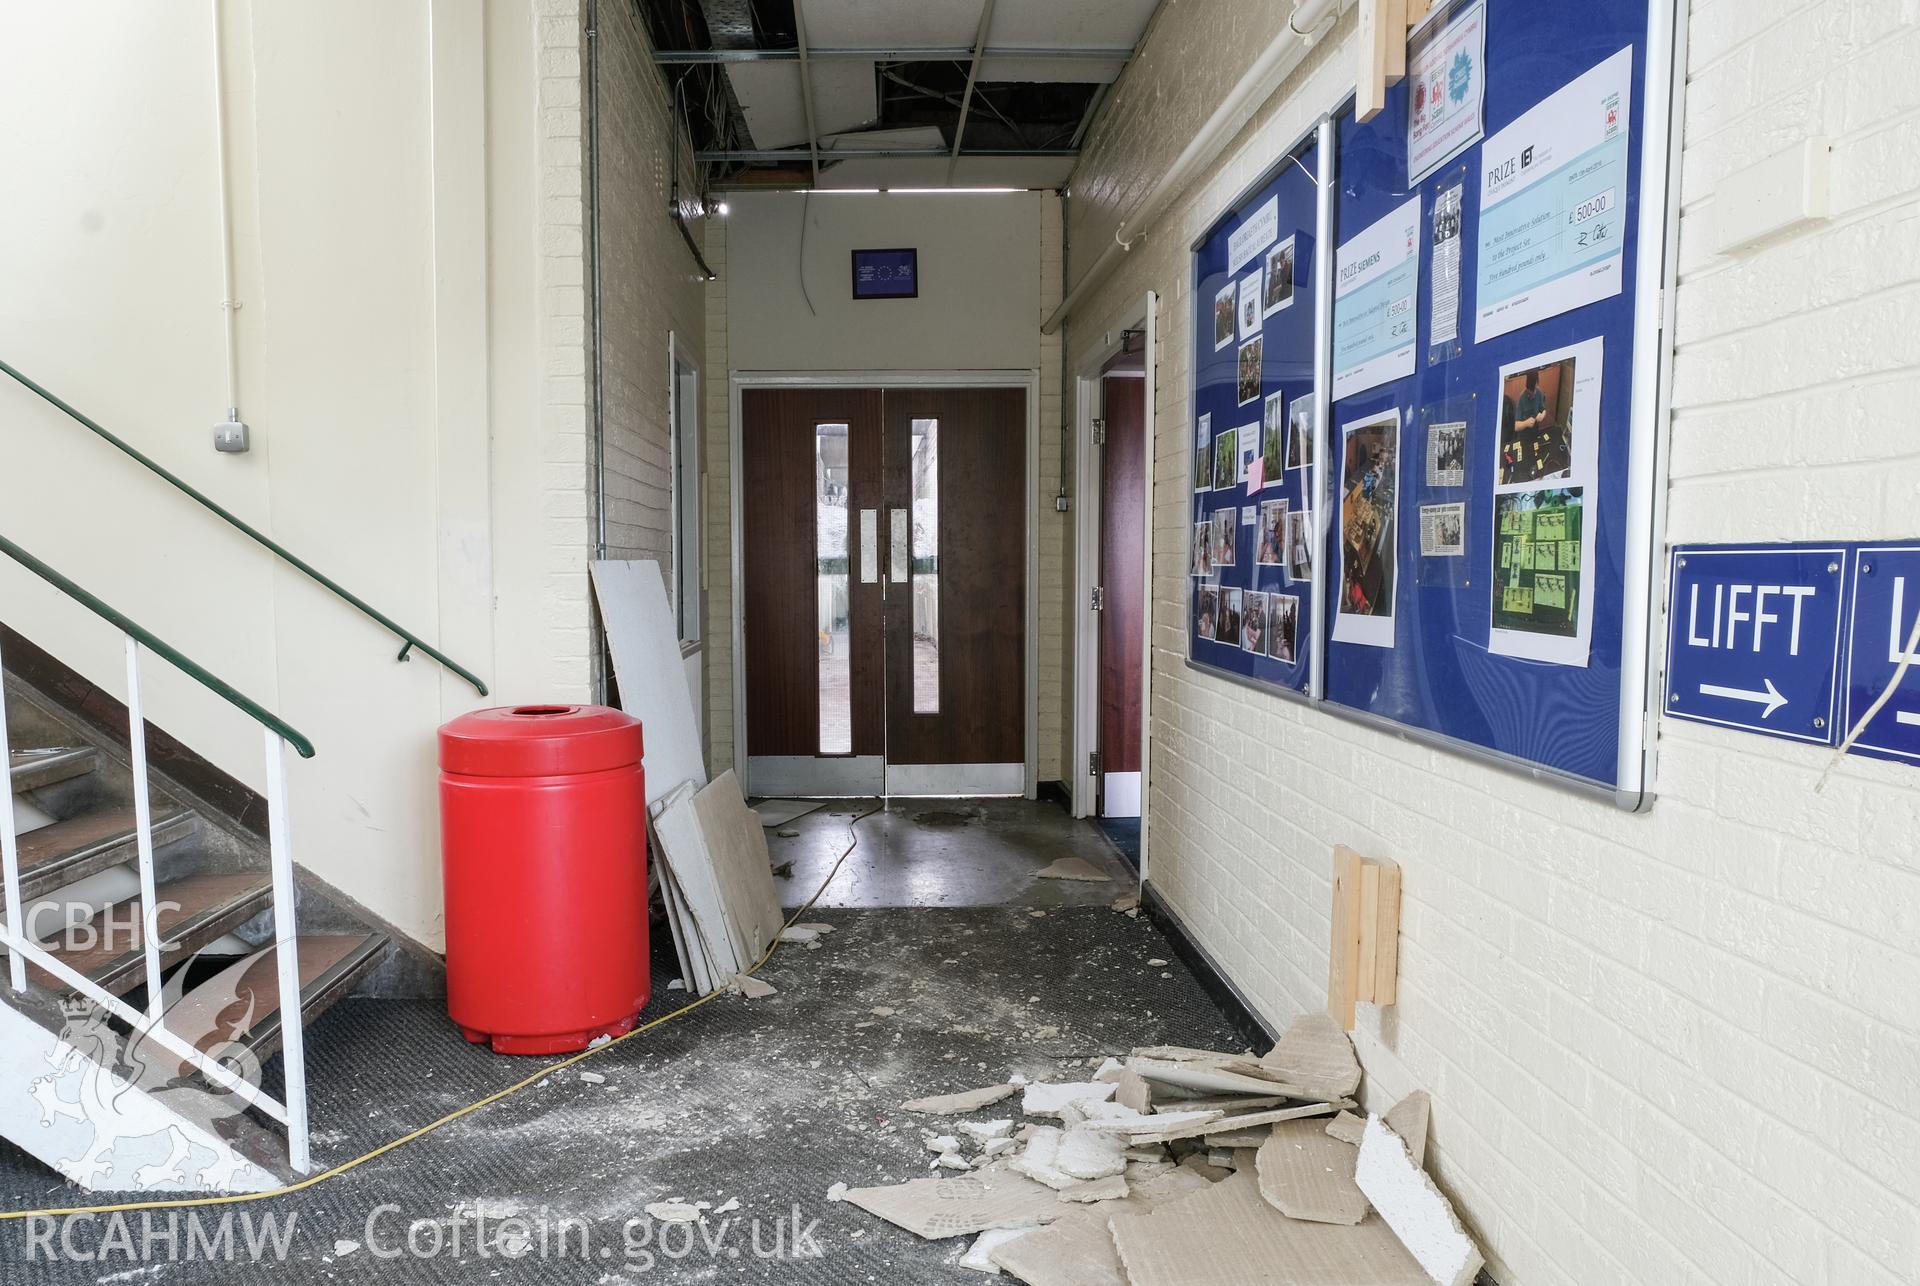 Digital colour photograph showing detailed interior view of hallway at Caernarfonshire Technical College, Ffriddoedd Road, Bangor. Photographed by Dilys Morgan and donated by Wyn Thomas of Grwp Llandrillo-Menai Further Education College, 2019.